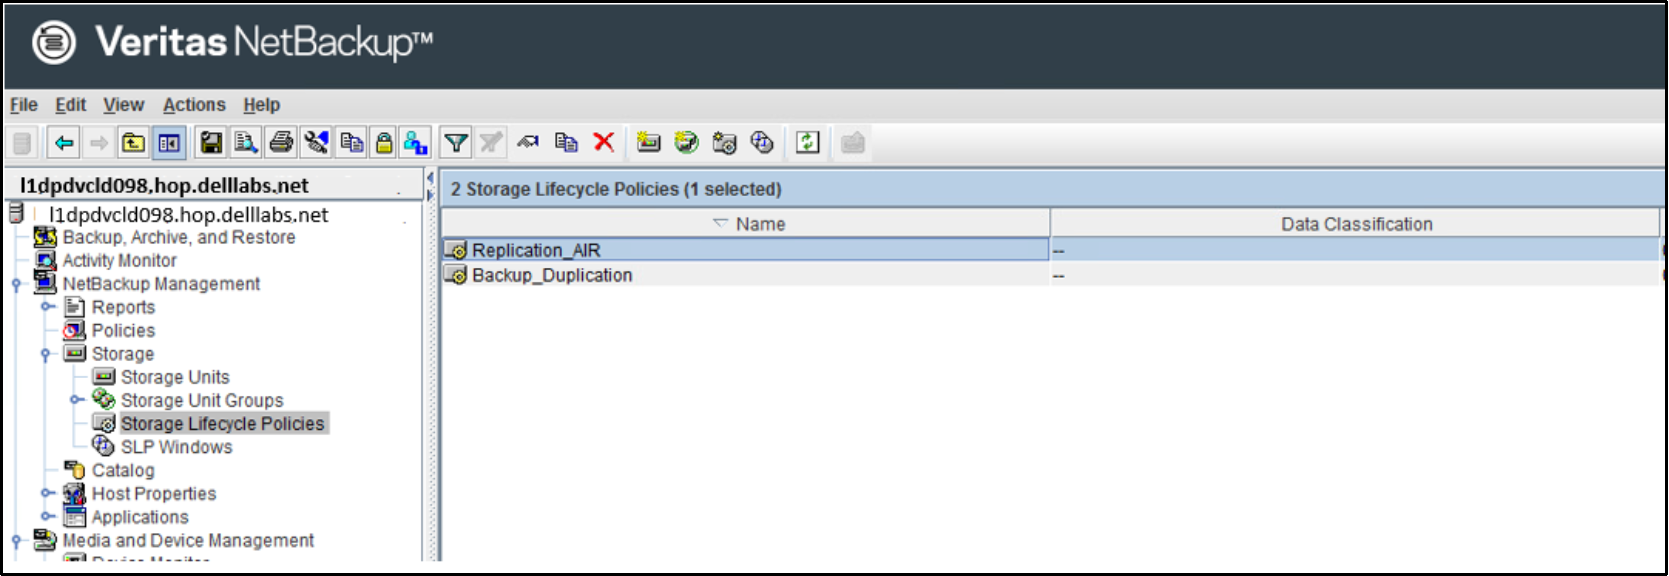 The image shows the created SLP from NetBackup console